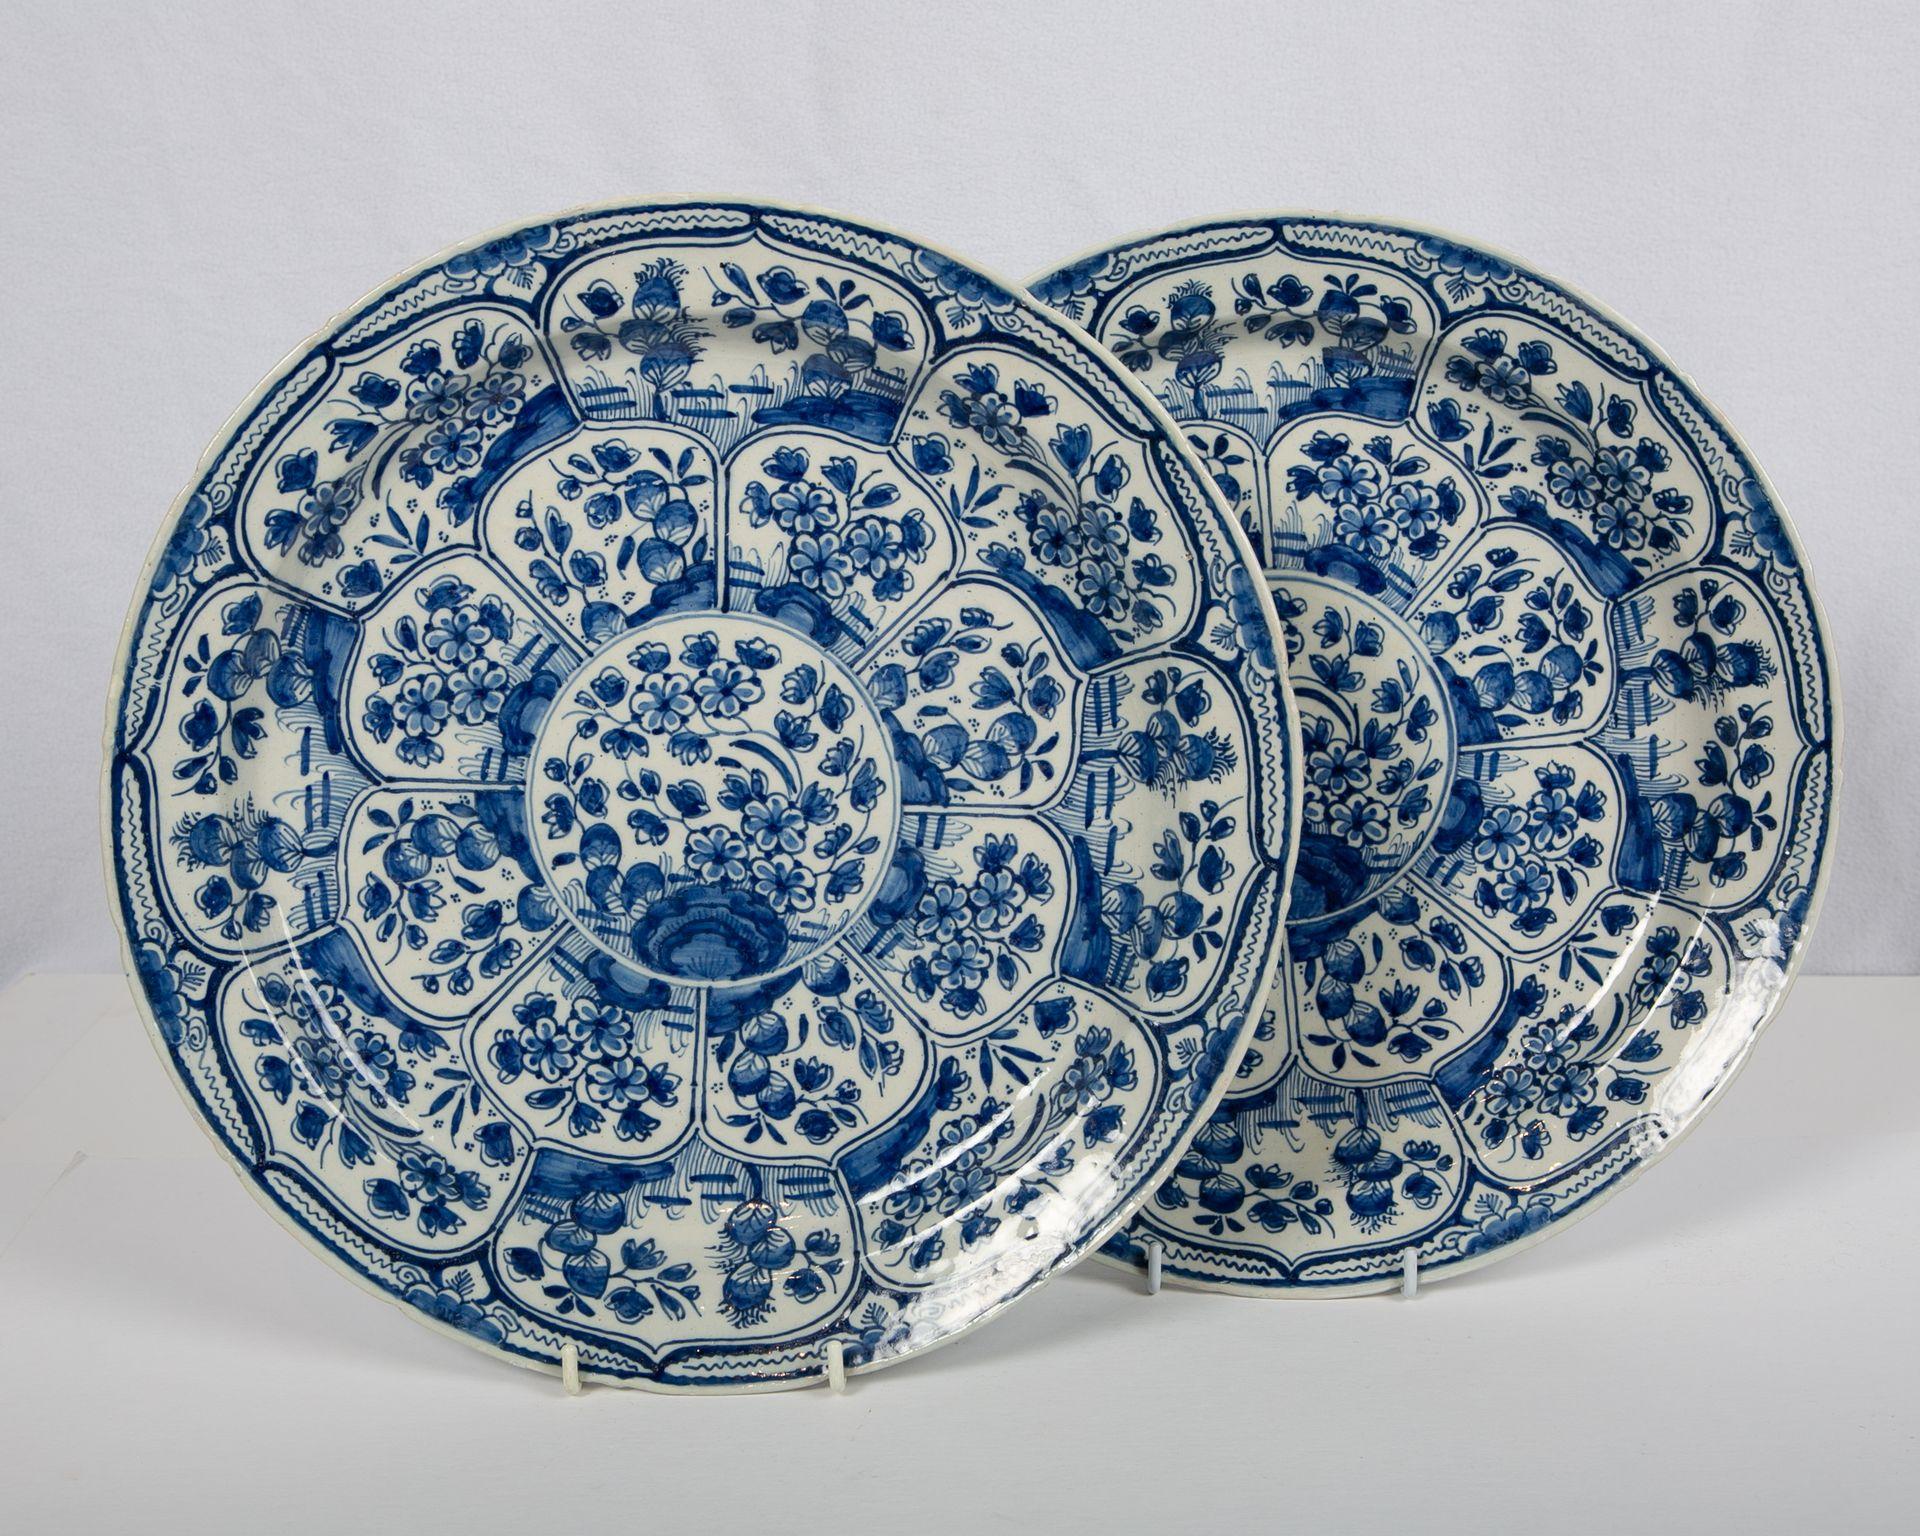 Rococo Pair of Blue and White Delft Chargers 18th Century Made by De Witte Starre